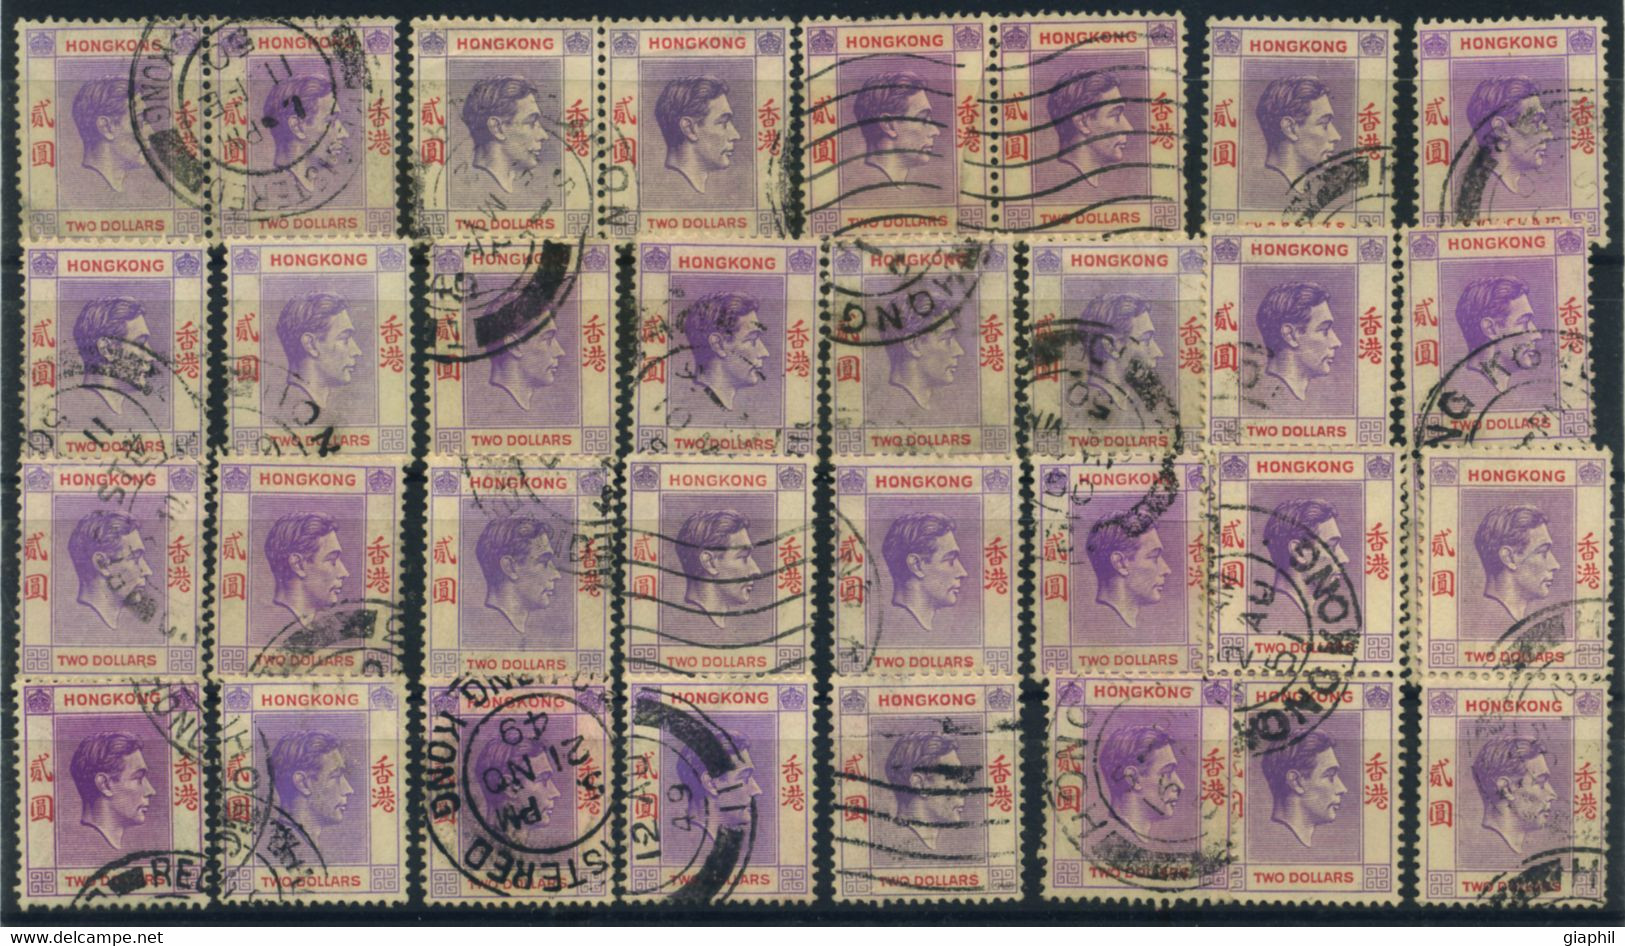 HONG KONG 1938-52 2 $ (SG 160) 32 USED EXAMPLES OFFER! - Gebraucht